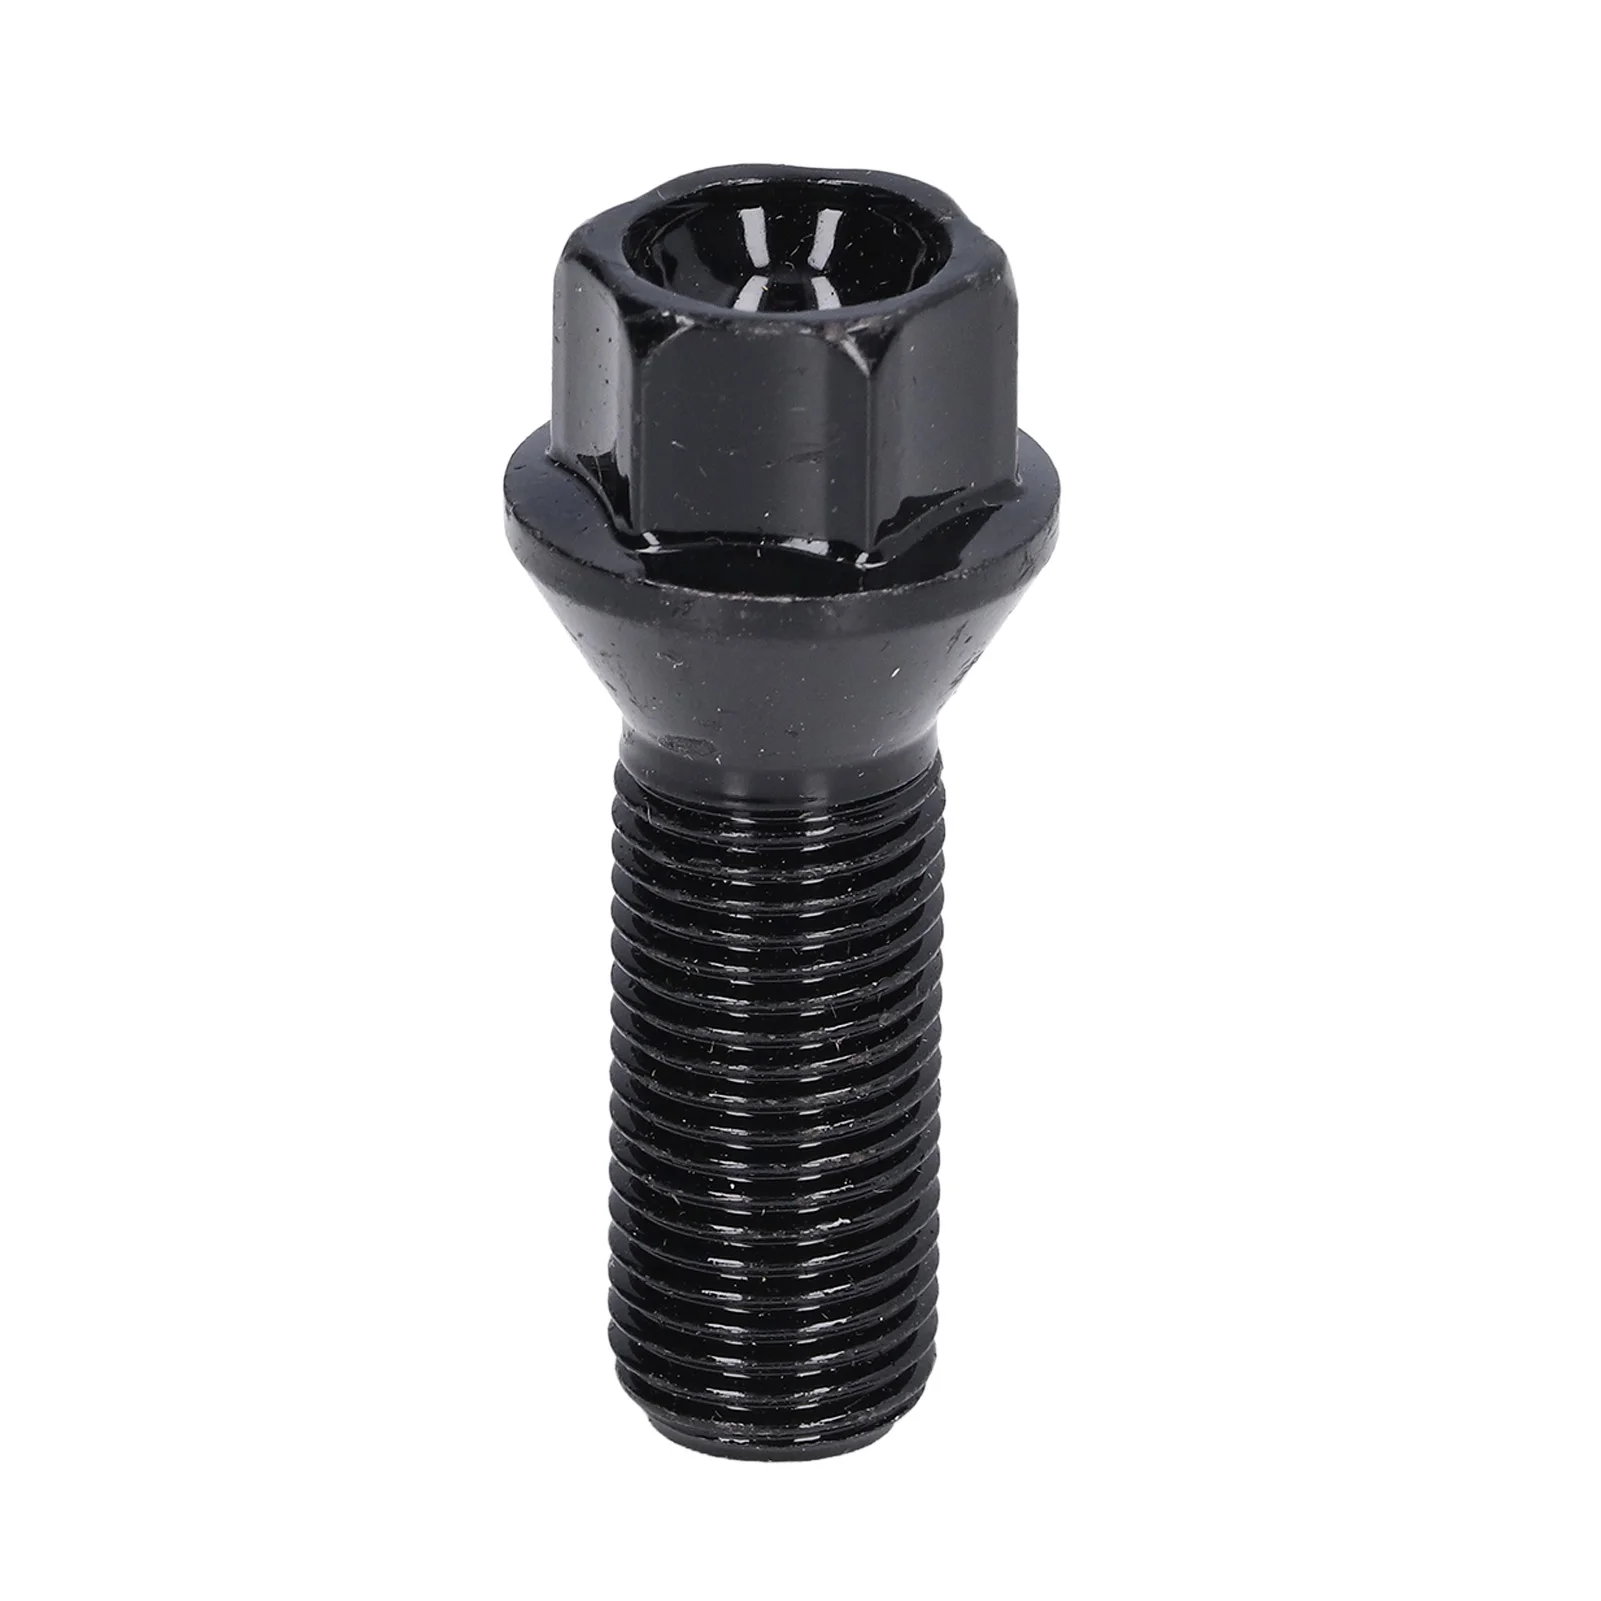 

M14x1.5 Black Steel Wheel Lug Bolt Replacement for 1 Series 2 Series 3 Series 5 Series 7 Series X1x3x5x6 525